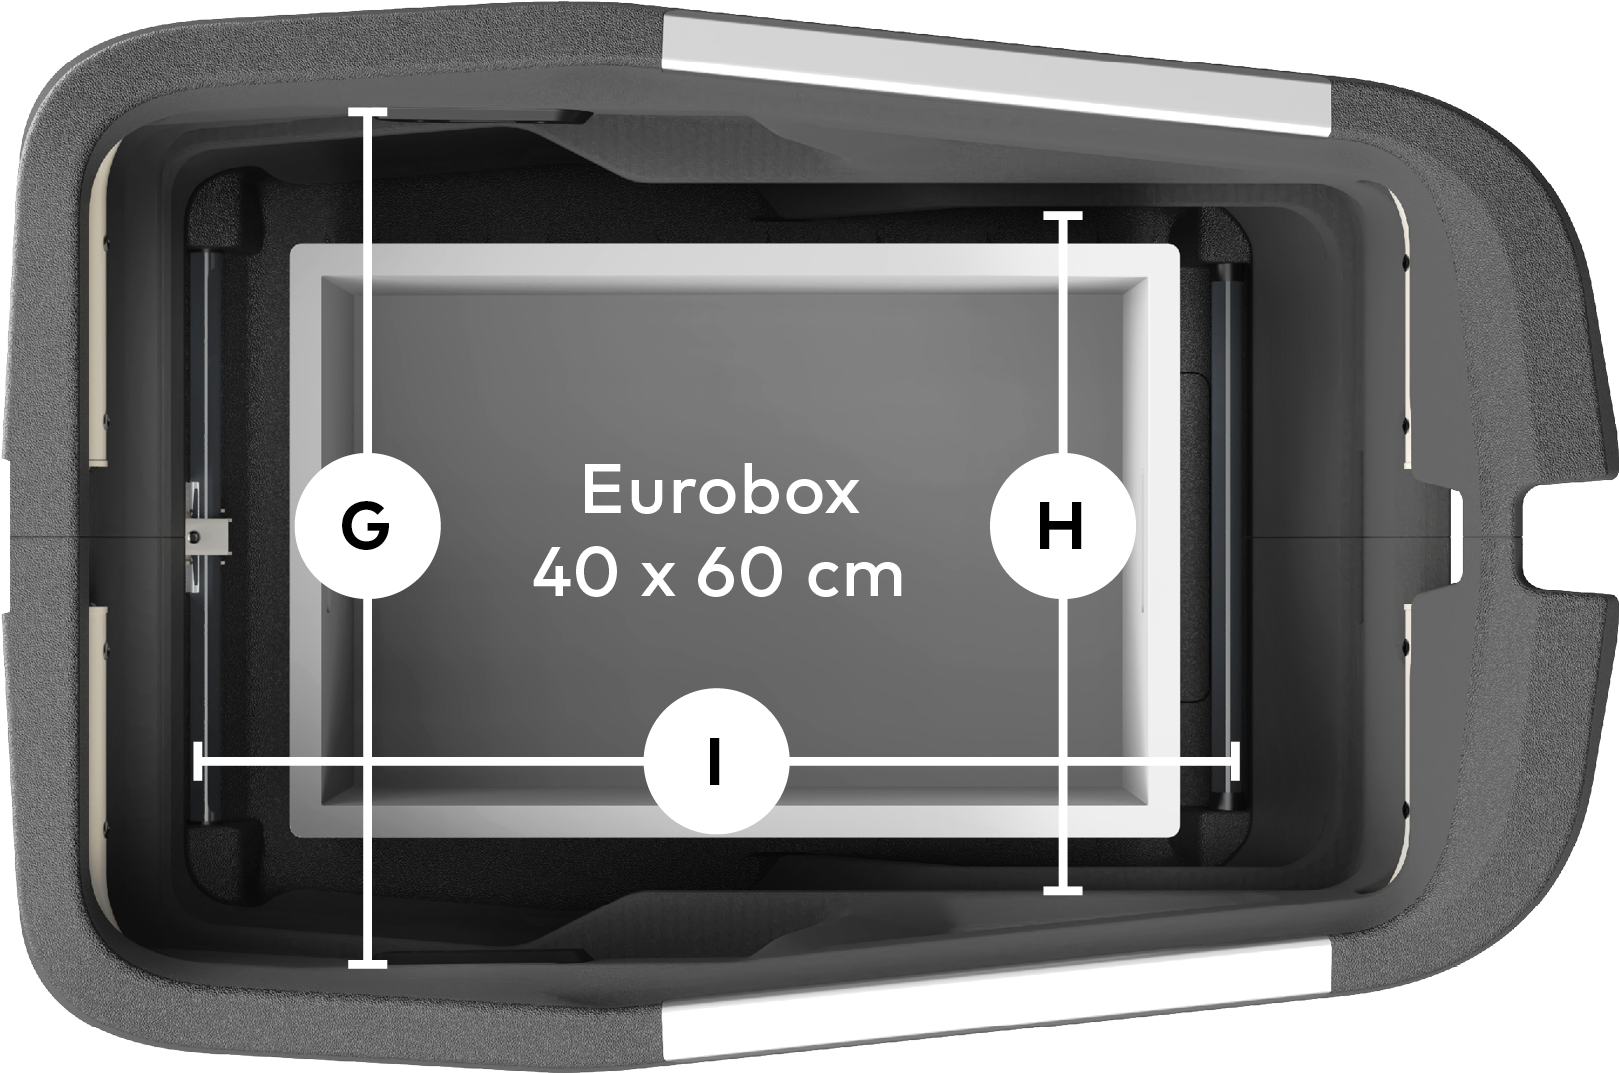 View from above on cargo box.
                            A 40 &times; 60 cm sized Eurobox lying in the cargo box,
                            the dimensions of the cargo space are drawn above it.
                            Width (front): 46 cm;
                            Width (rear): 56,5 cm;
                            Length: 70 cm